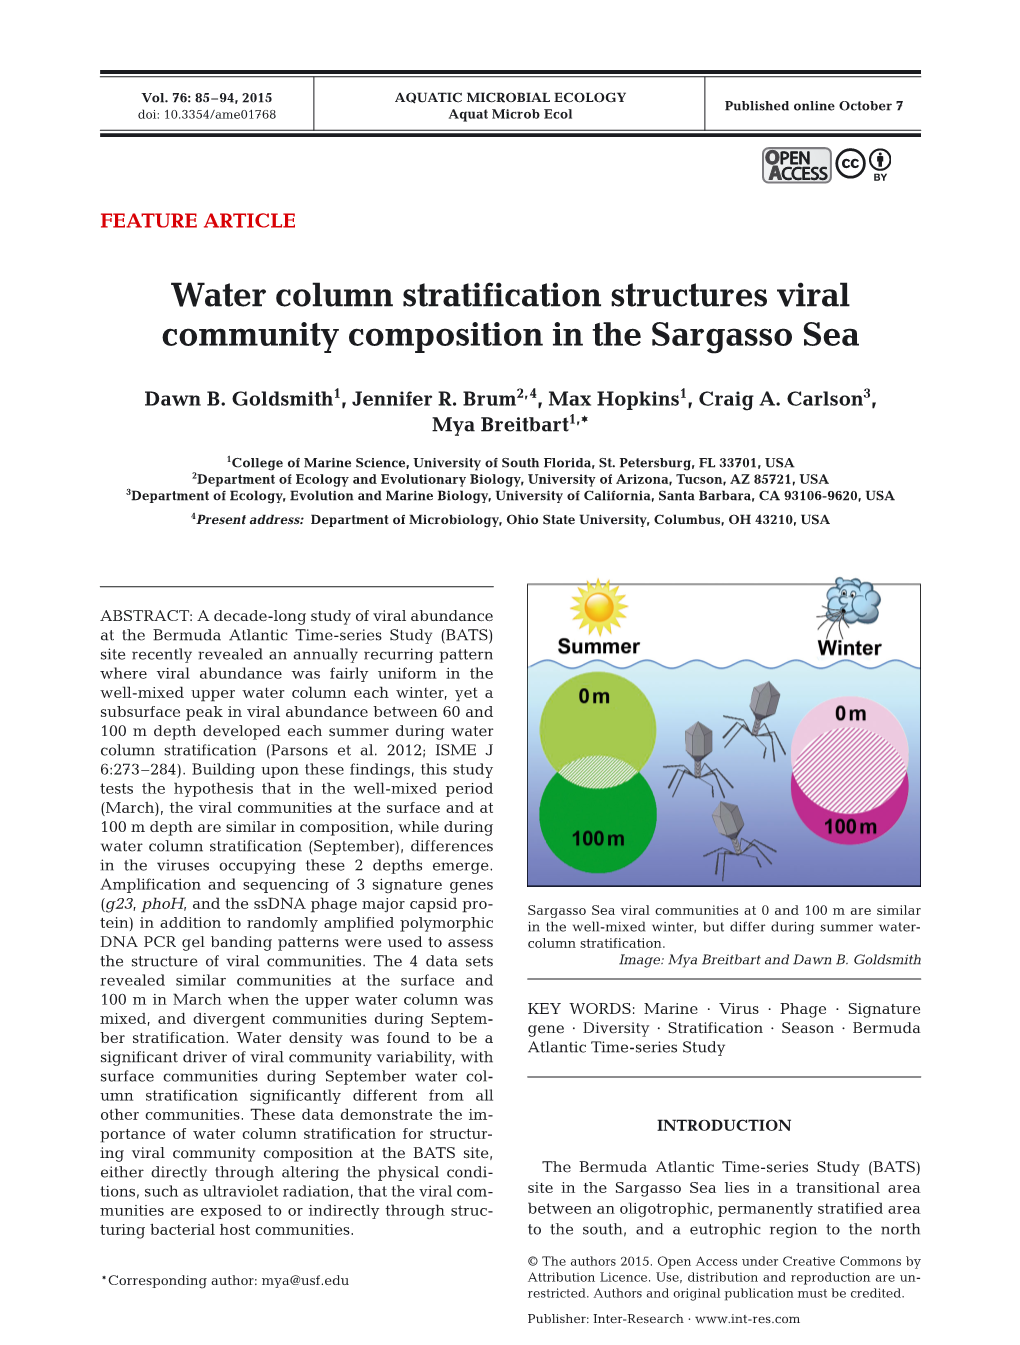 Water Column Stratification Structures Viral Community Composition in the Sargasso Sea